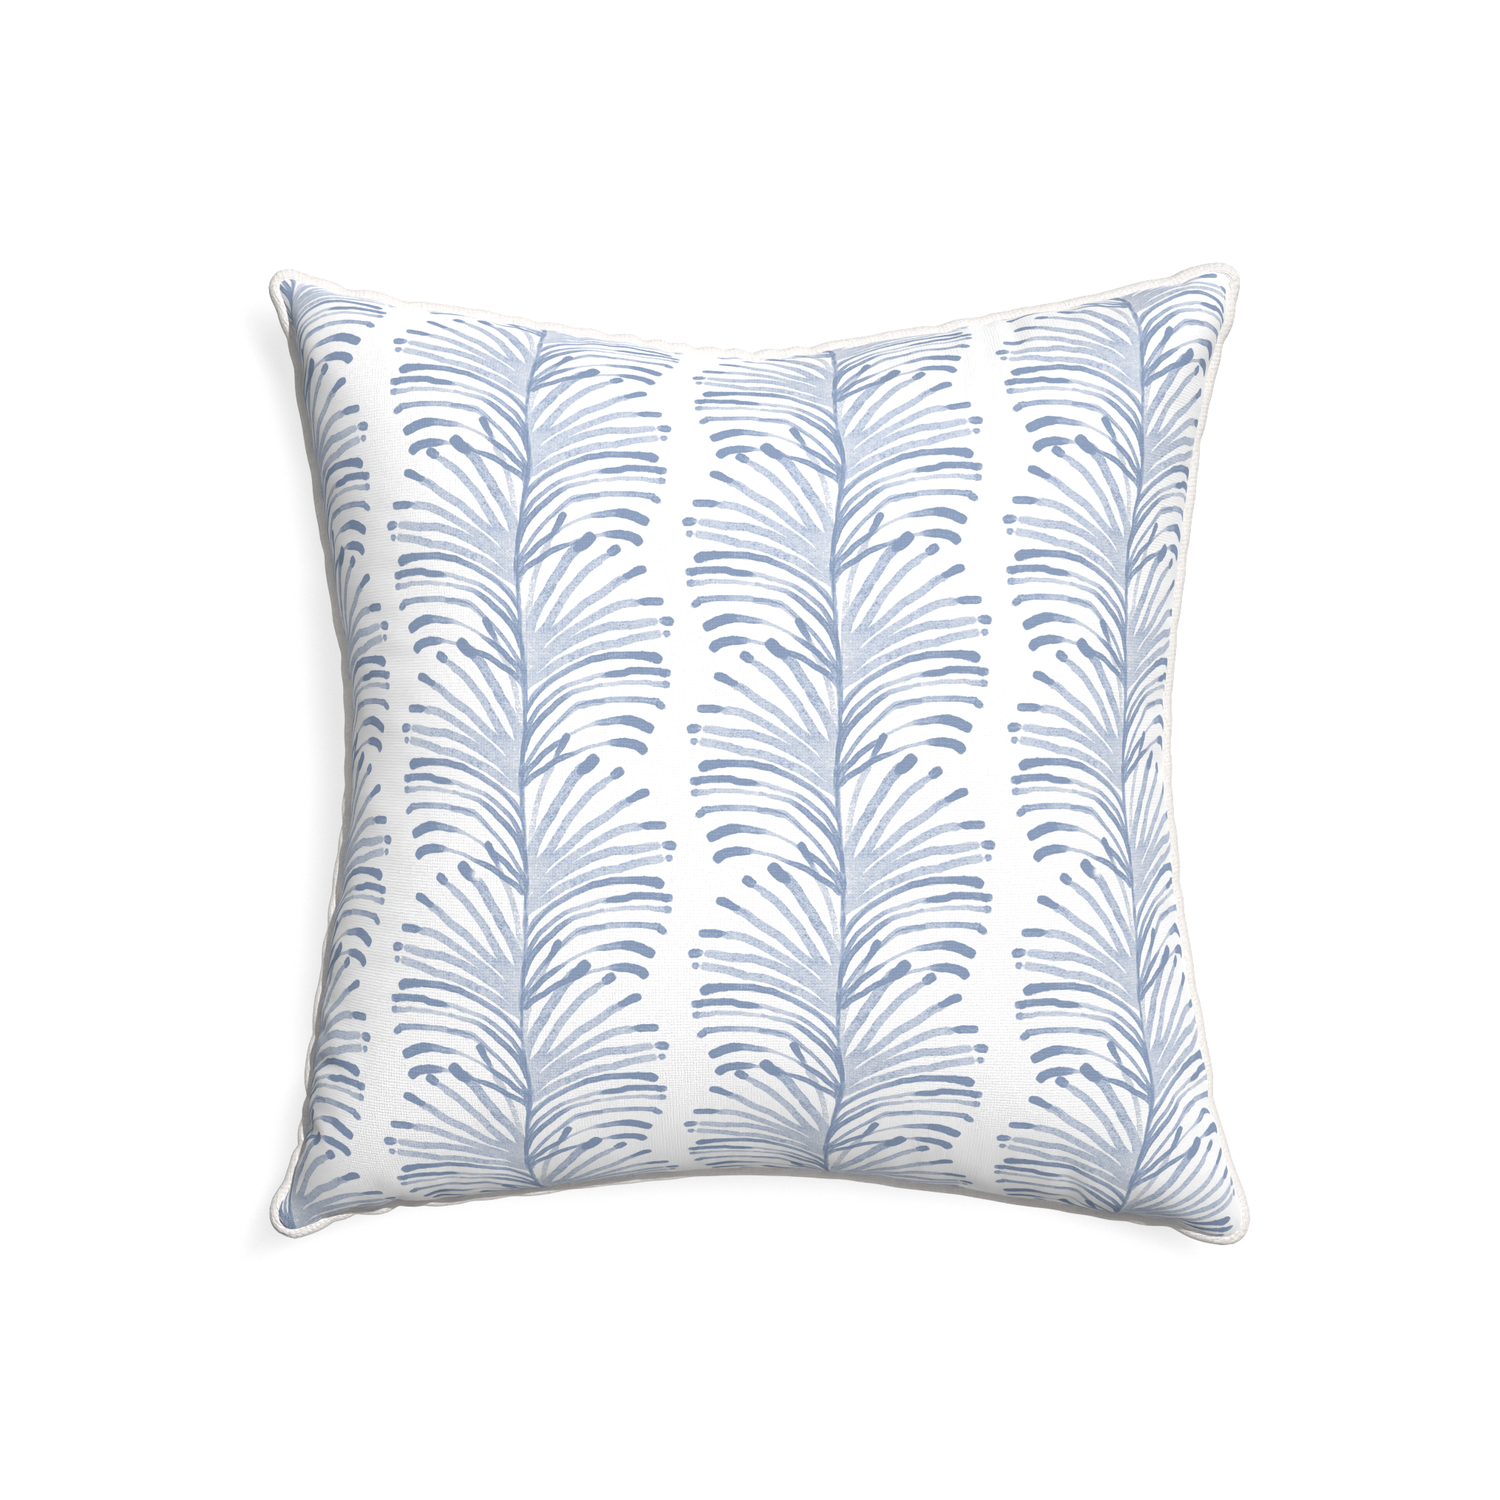 22-square emma sky custom sky blue botanical stripepillow with snow piping on white background